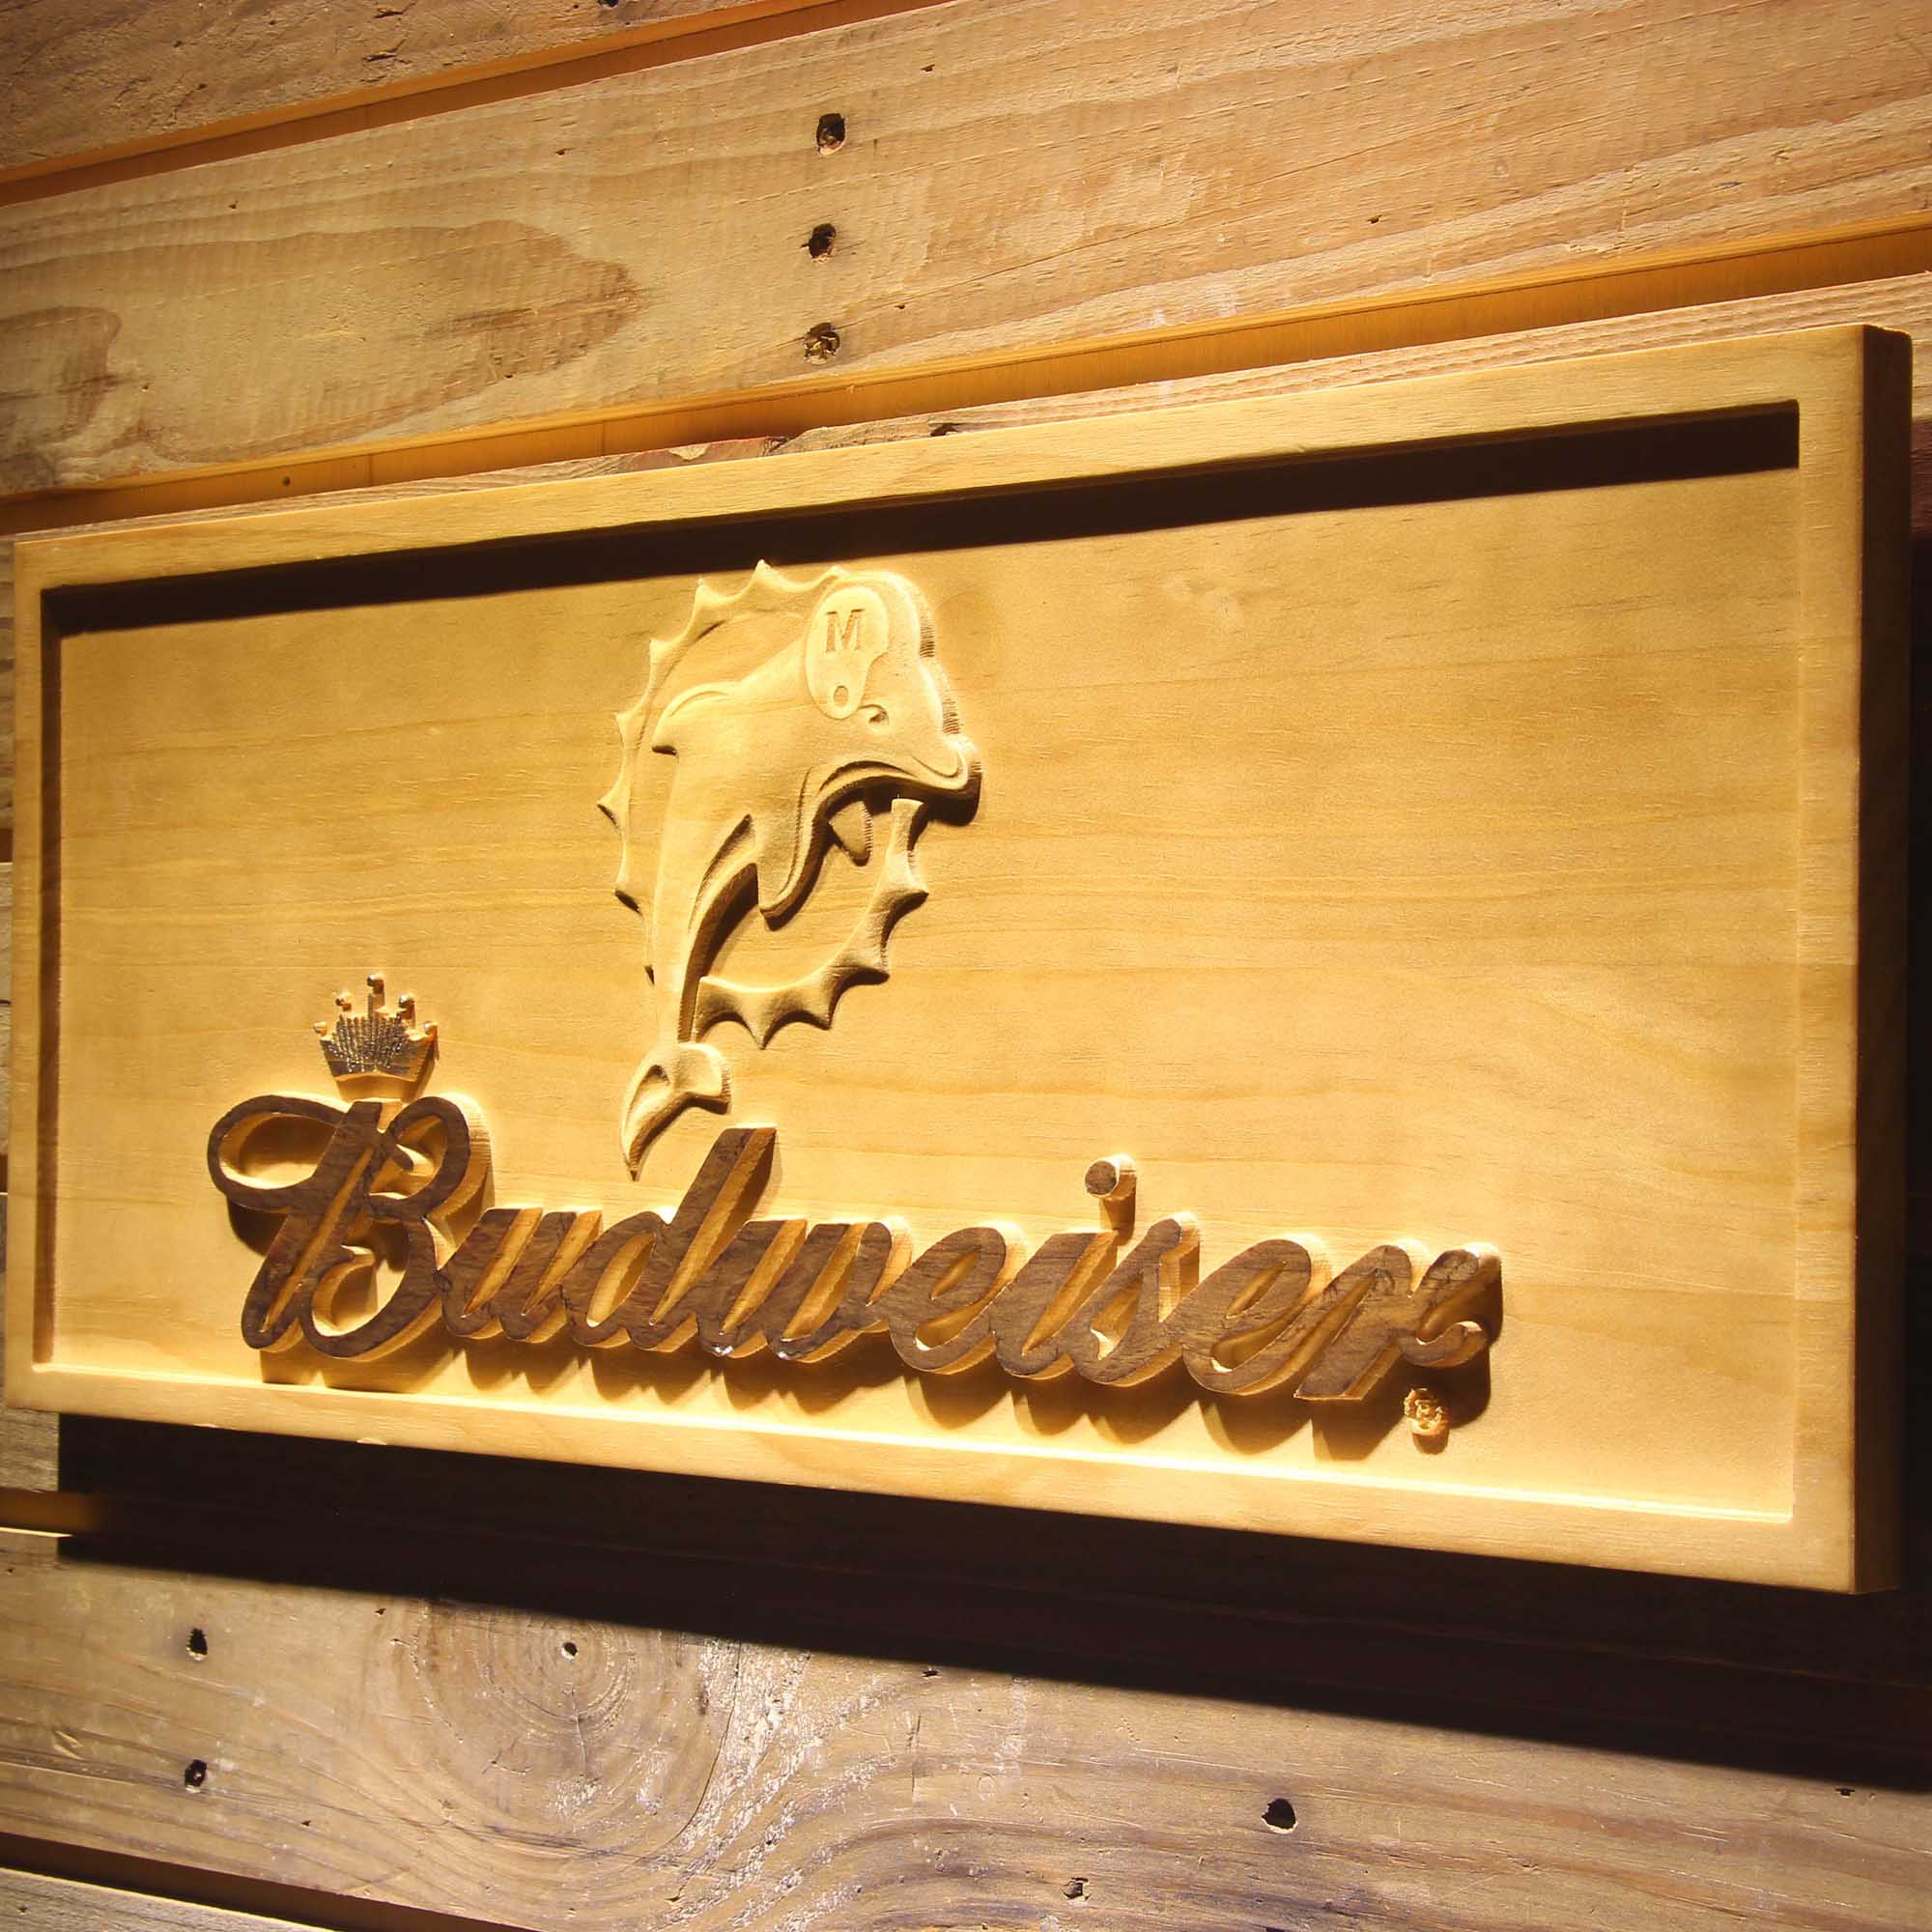 Miami Dolphins Budweiser Beer Pub 3D Wooden Engrave Sign